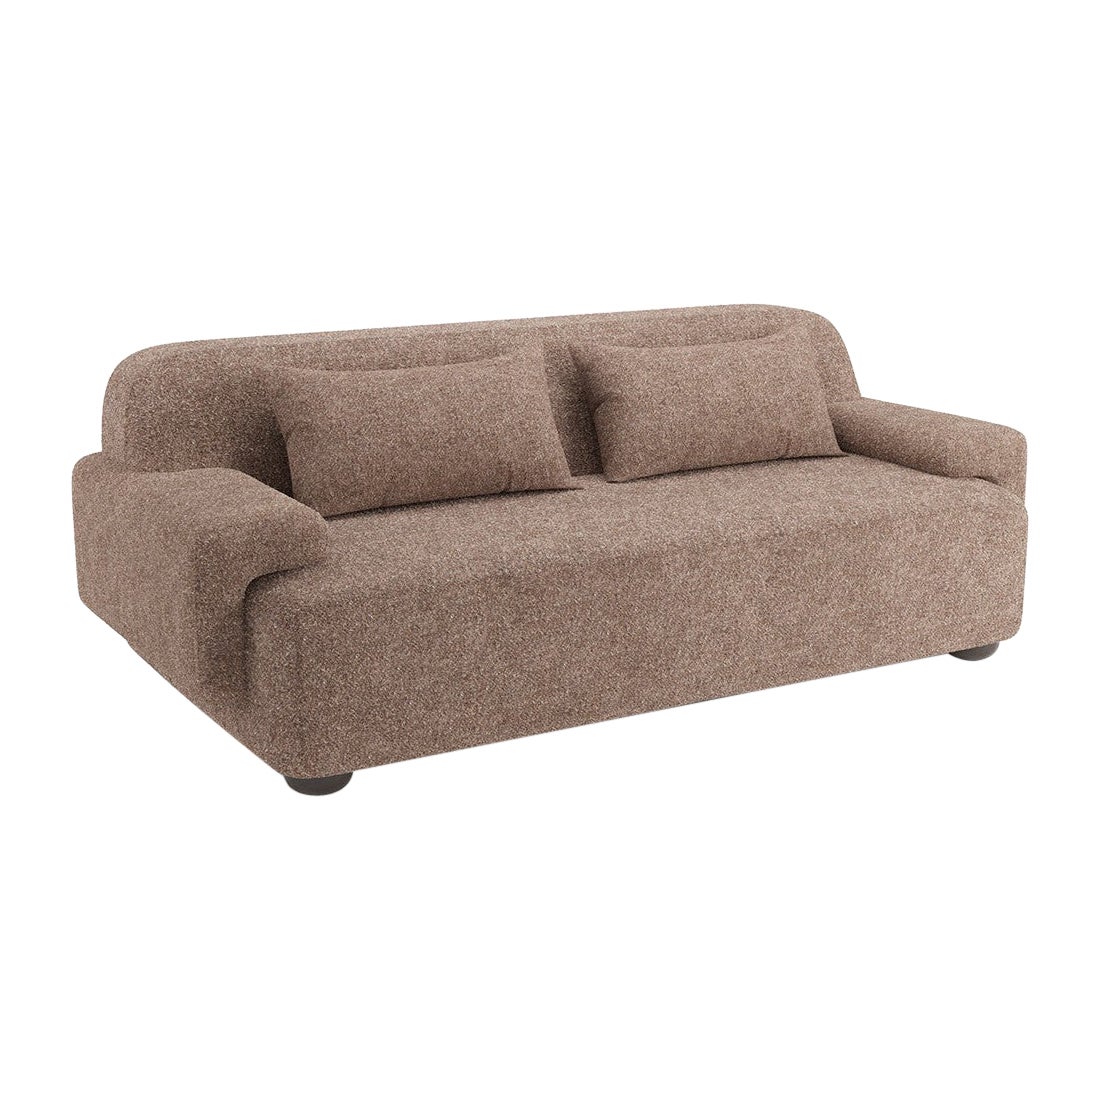 Popus Editions Lena 2.5 Seater Sofa in Mole Taupe Antwerp Linen Upholstery